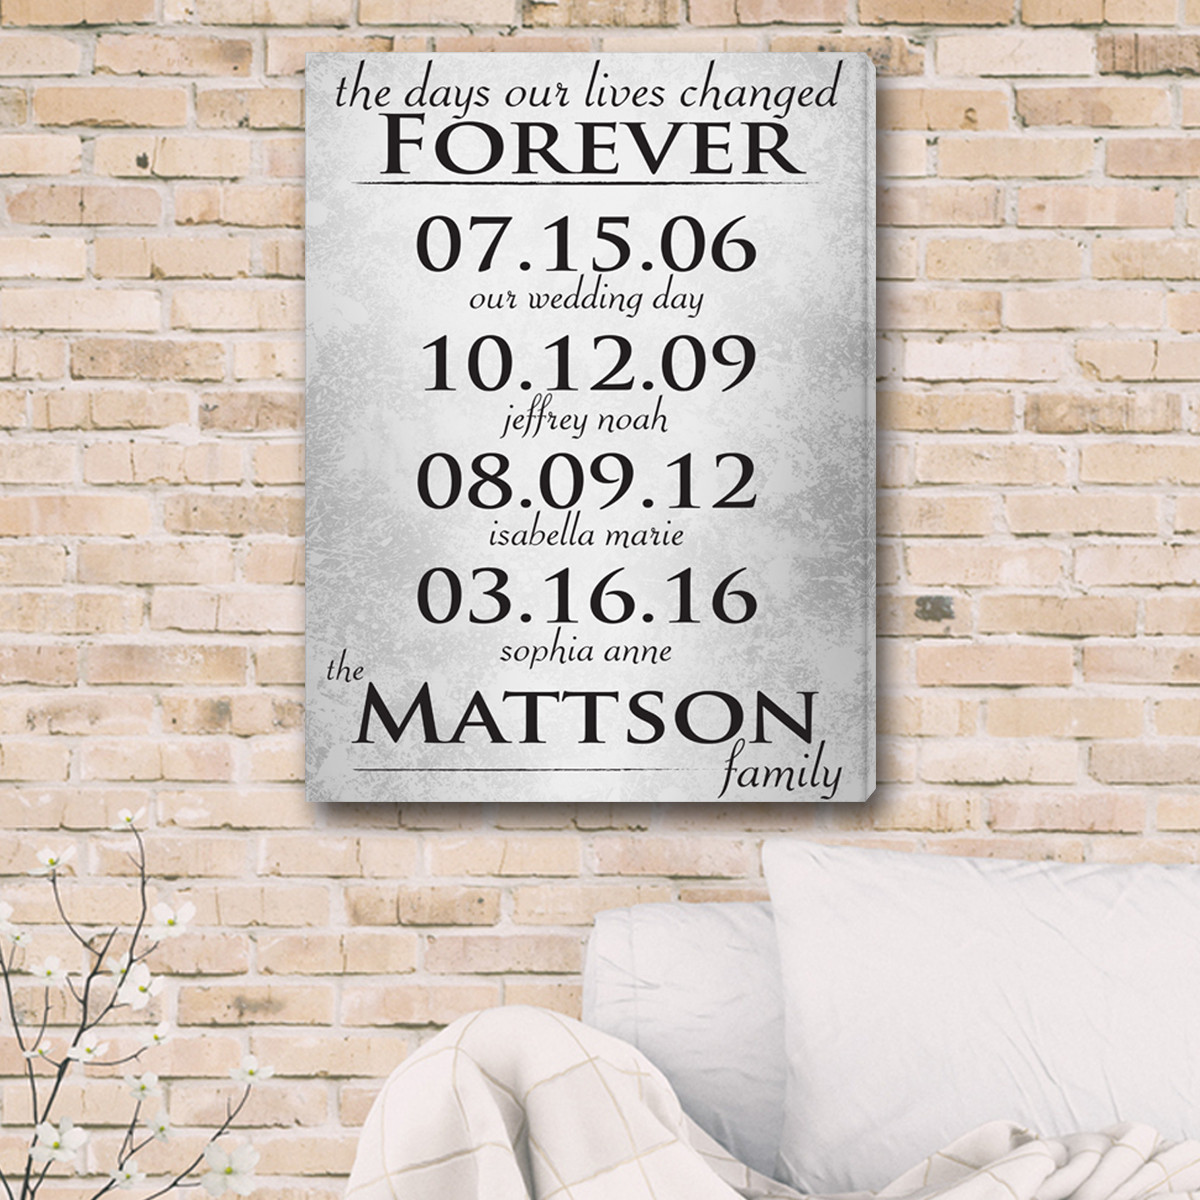 30Th Wedding Anniversary Gift Ideas For Parents
 Traditional 30th Wedding Anniversary Gifts For Your Parents